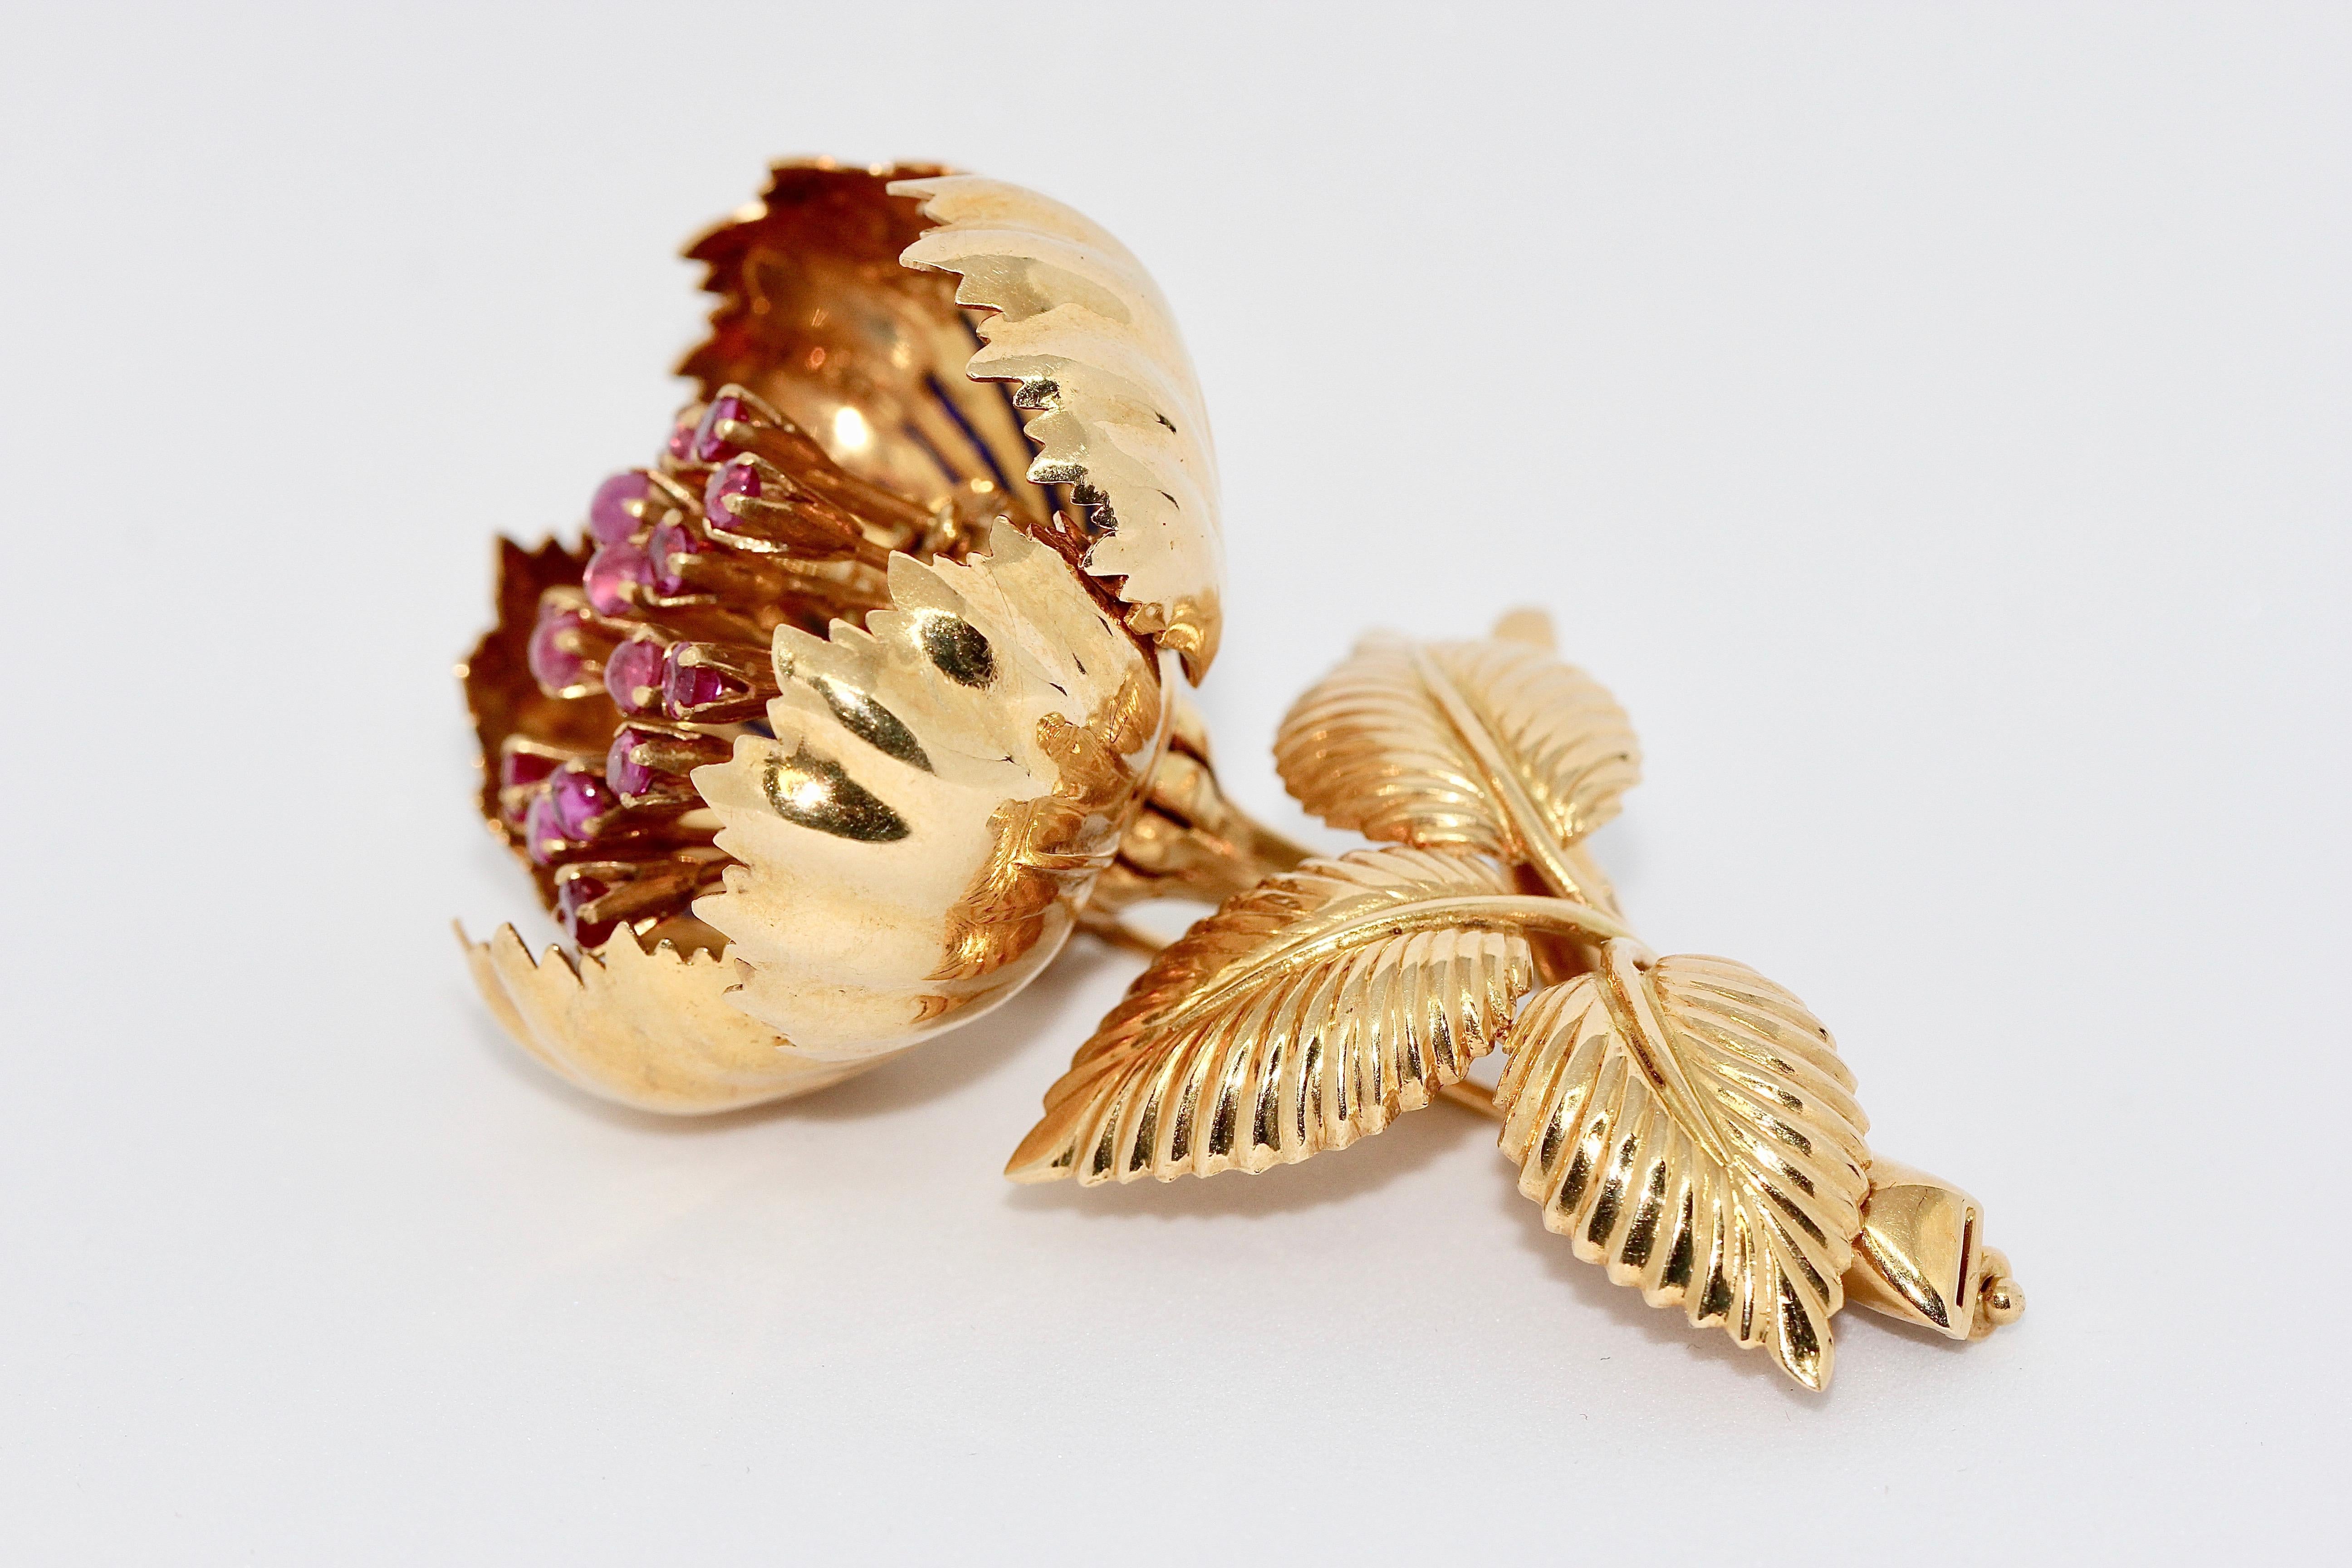 Enchanting, 18 Karat Floral Gold Brooch with Movable Petals, Rubies and Enamel In Excellent Condition For Sale In Berlin, DE